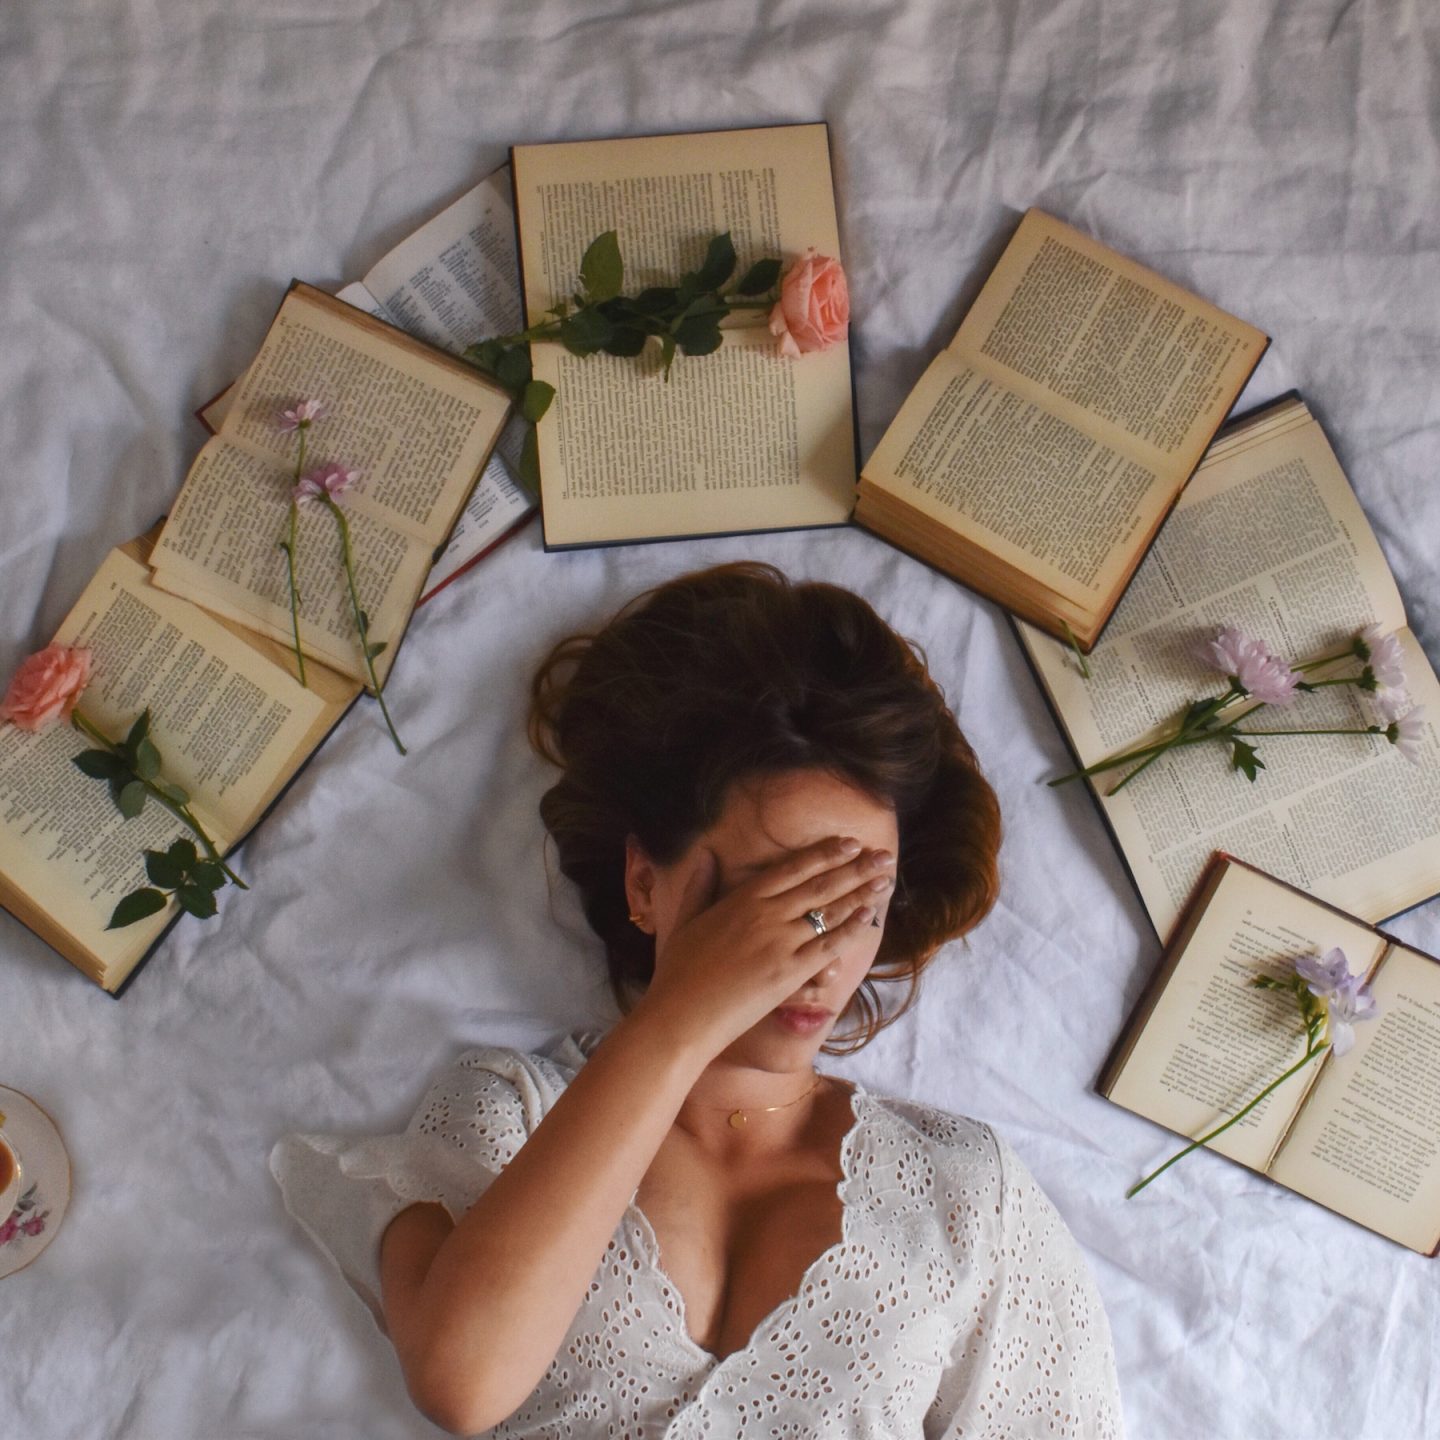 Photo of books, flowers and woman